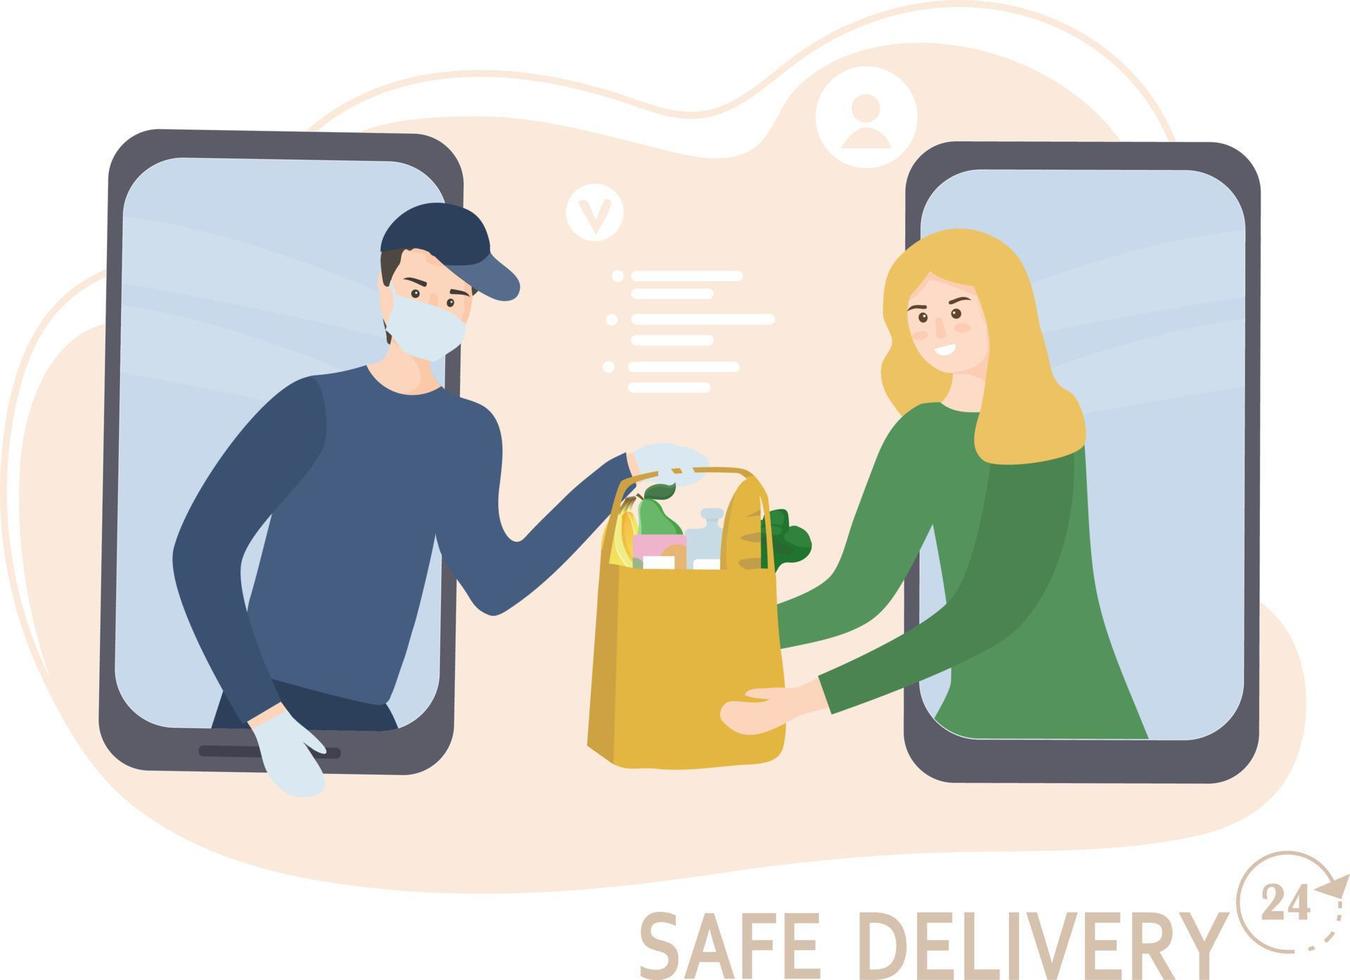 The concept of safe home delivery. Courier holds a bag of food, hands the customer fast food. Man in a mask and glove, protection from viruses. Online grocery store. vector